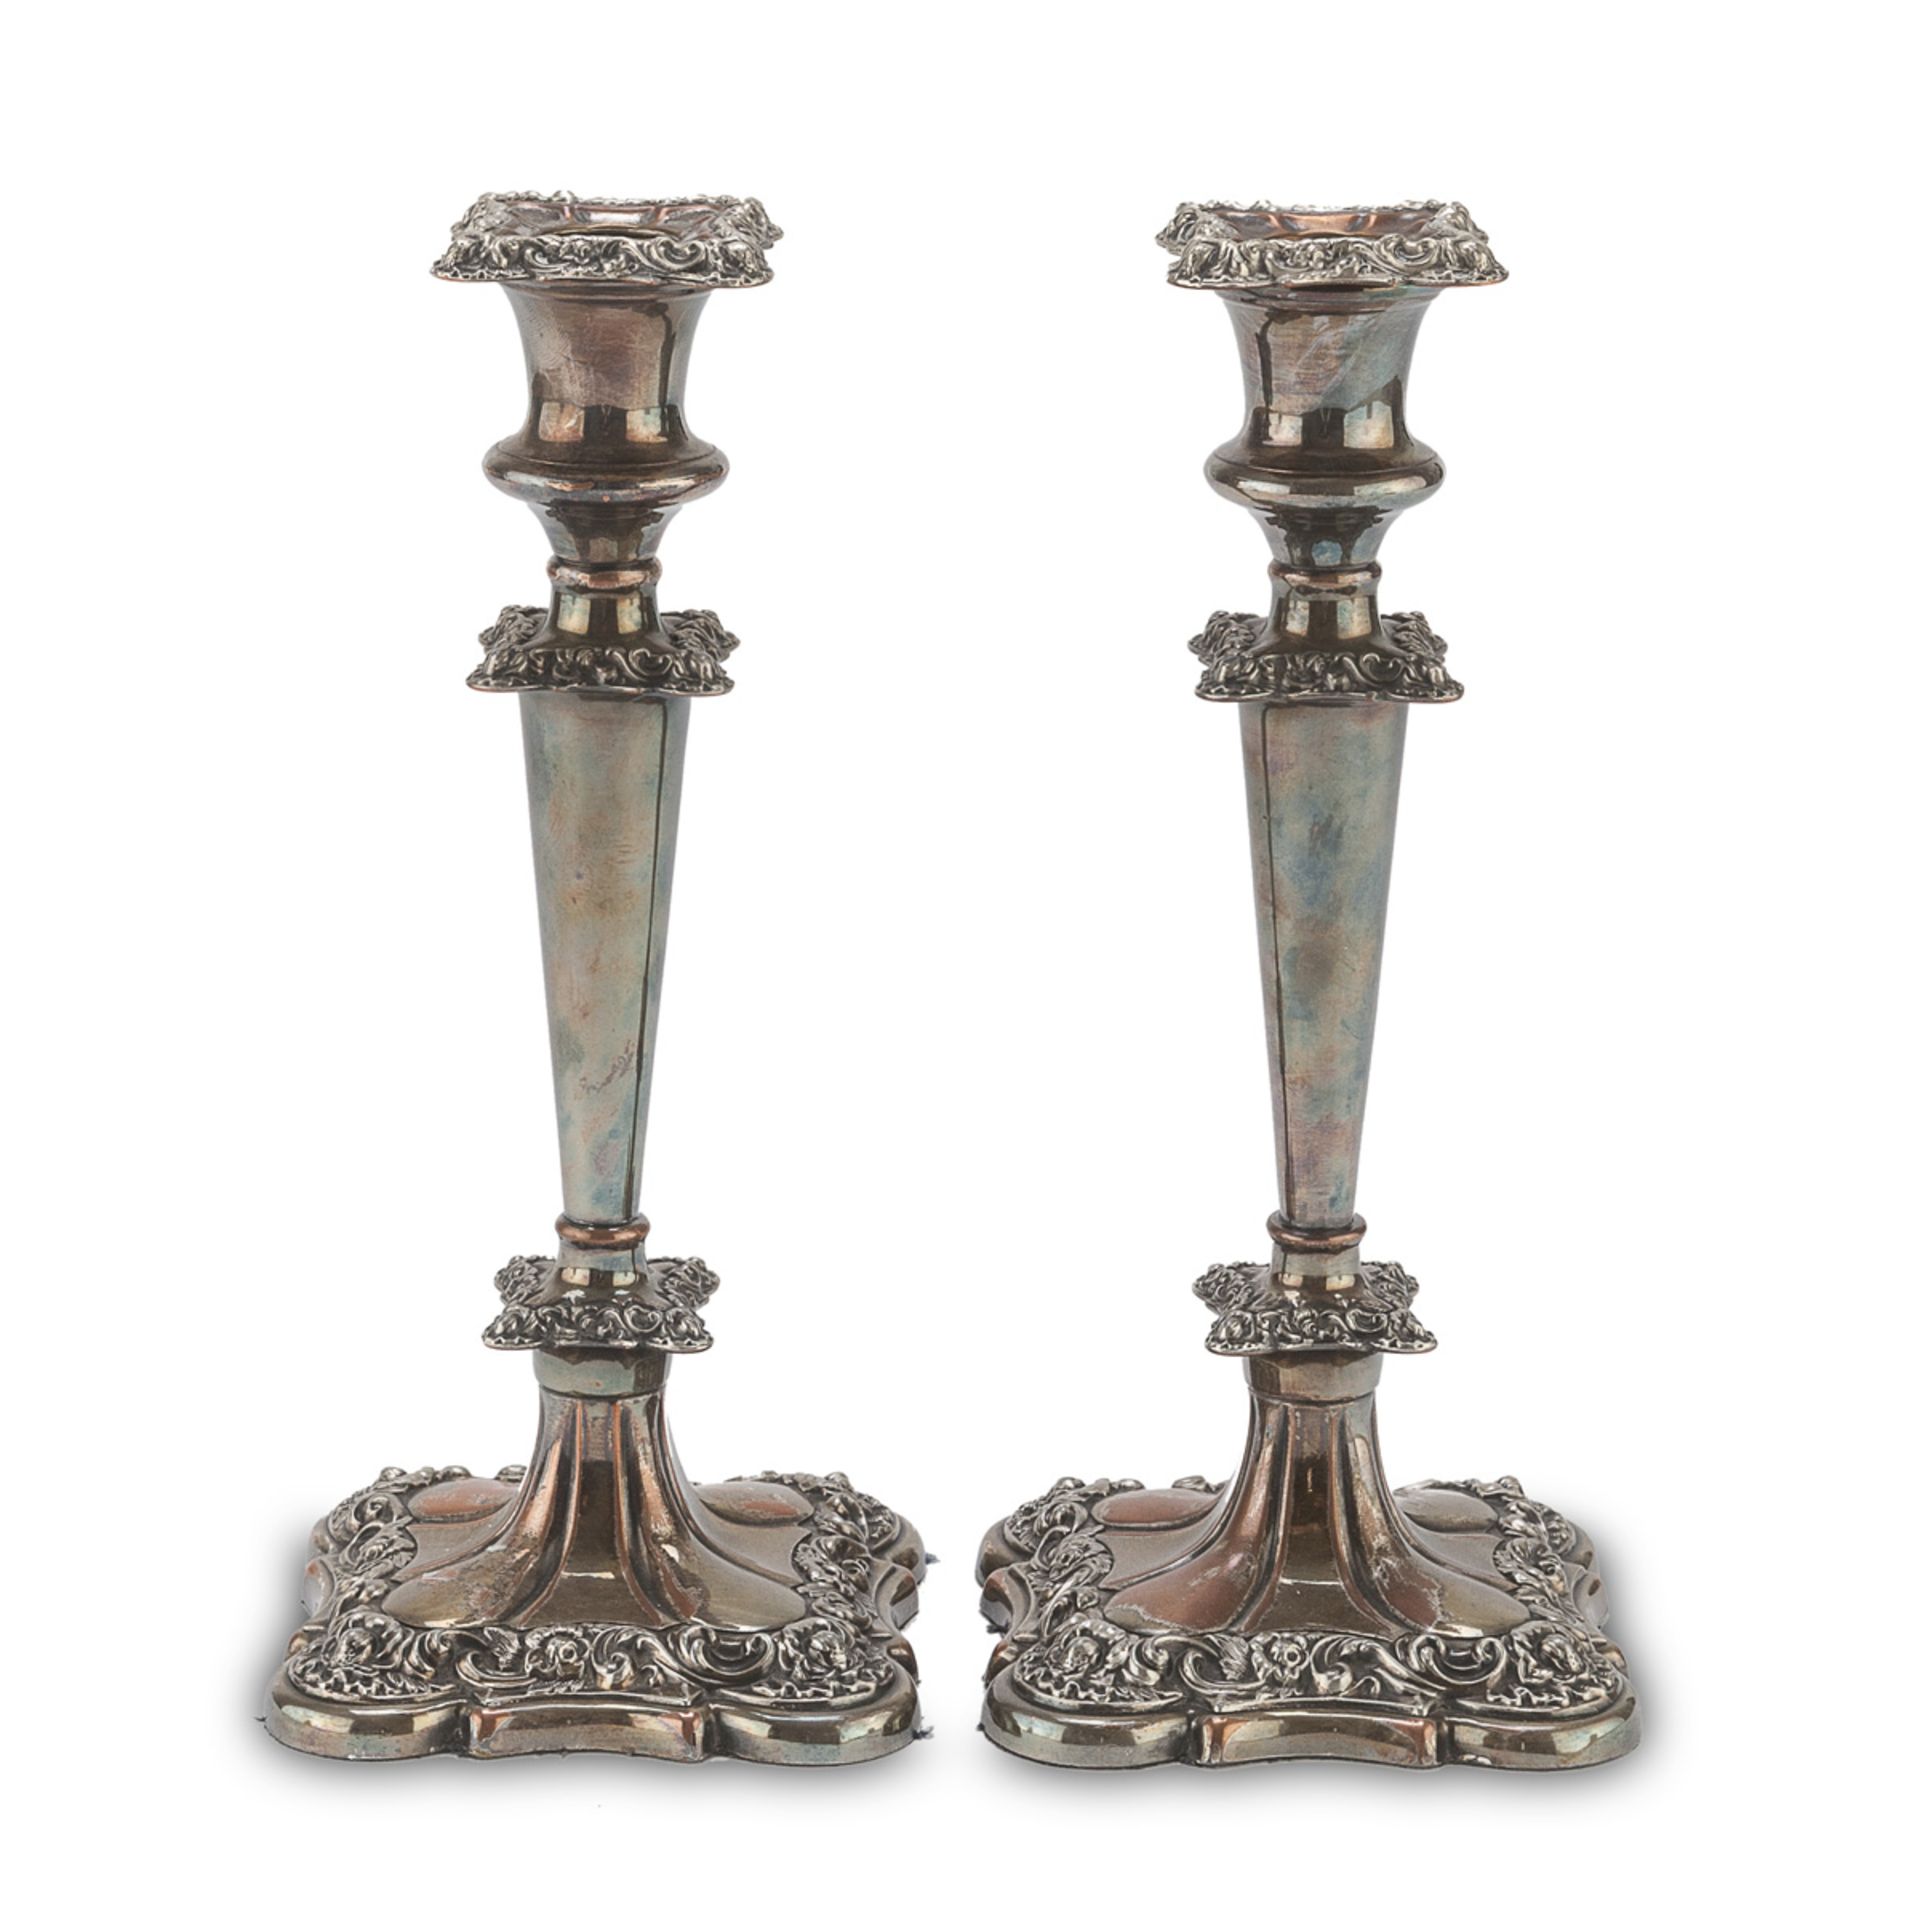 A PAIR OF SILVER-PLATED CANDLESTICKS - 20TH CENTURY